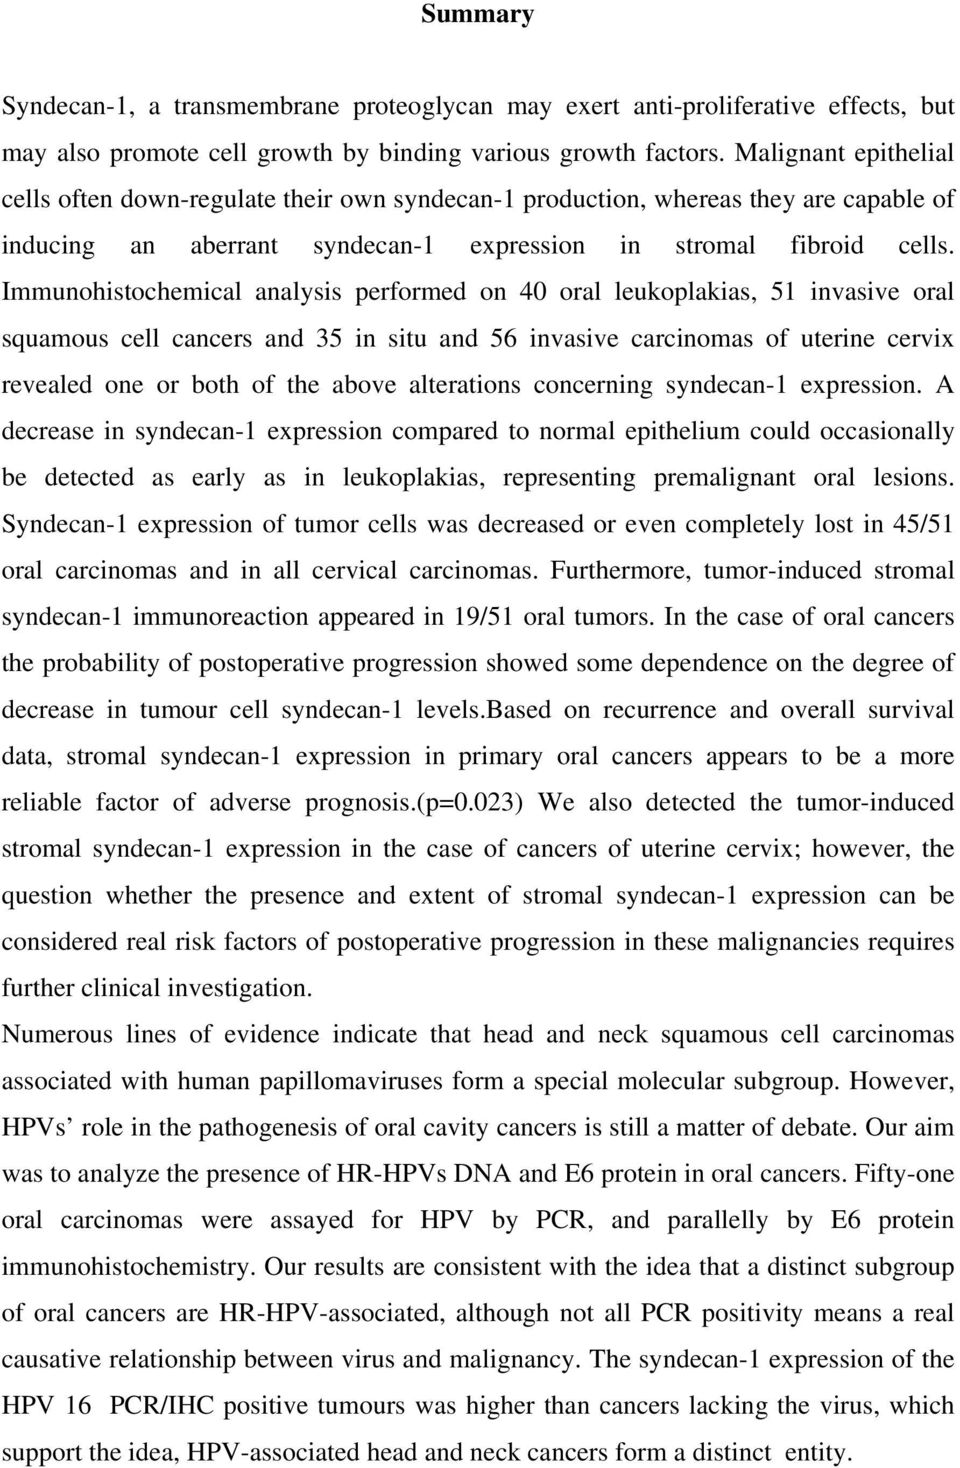 Immunohistochemical analysis performed on 40 oral leukoplakias, 51 invasive oral squamous cell cancers and 35 in situ and 56 invasive carcinomas of uterine cervix revealed one or both of the above